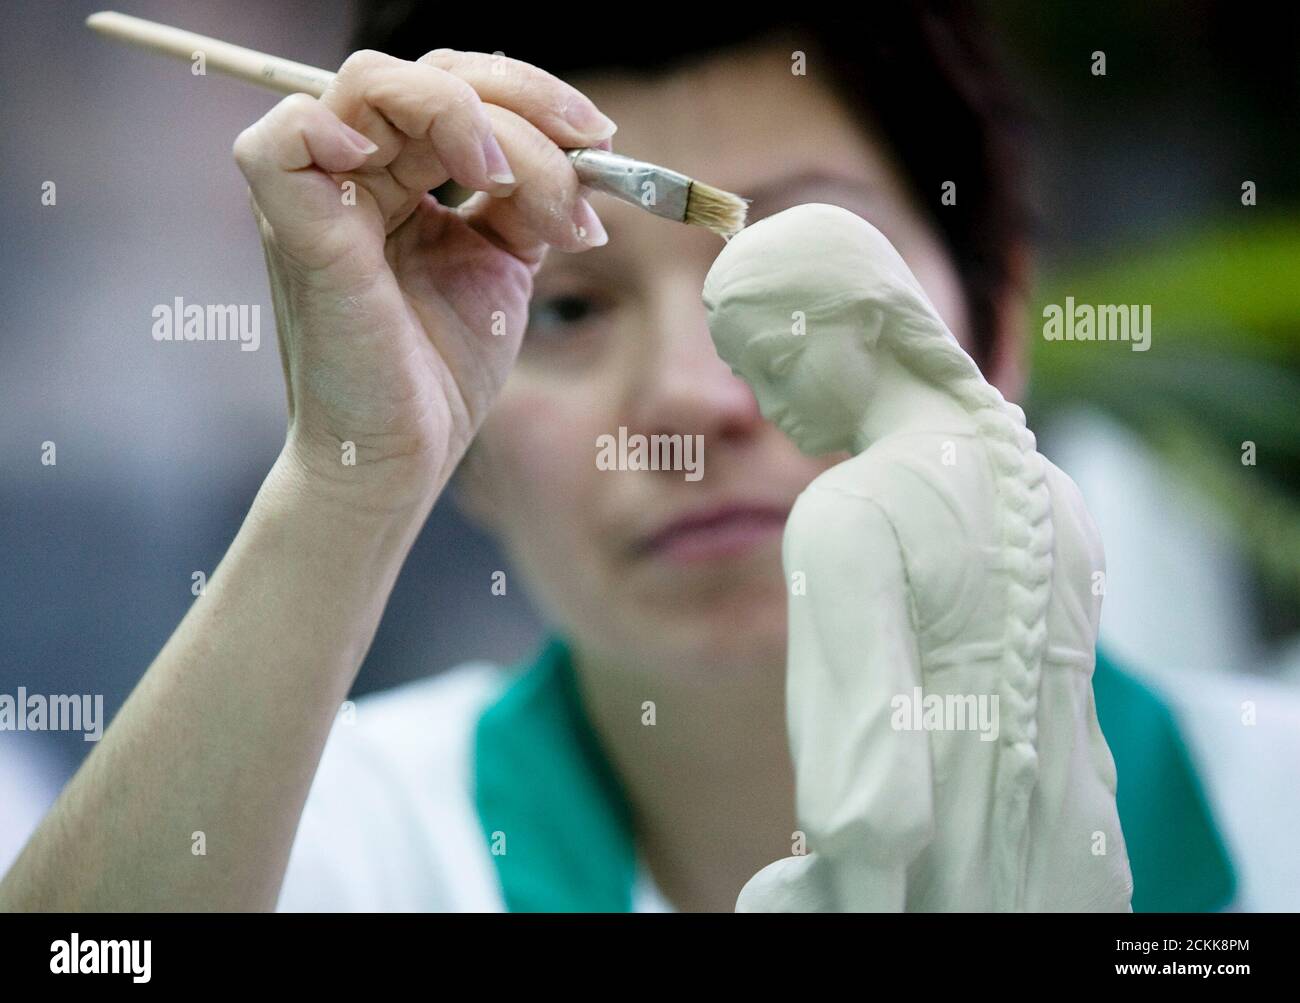 A woman wets the surface of a clay figure that is to be used to cast porcelain sculptures in the Dulevo Porcelain factory in the town of Dulevo, 115 km (73 miles) from Moscow February 20, 2009. A Tsarist-era porcelain factory that survived the Russian revolution and the end of the Soviet Union is on the verge of collapse, its plight typical of hundreds of outmoded industrial plants across this vast country. Founded in 1832, the Dulevo Porcelain pottery once supplied the Russian court. In the 20th century, it produced special communist revolutionary pieces for the Bolshevik elite and their alli Stock Photo